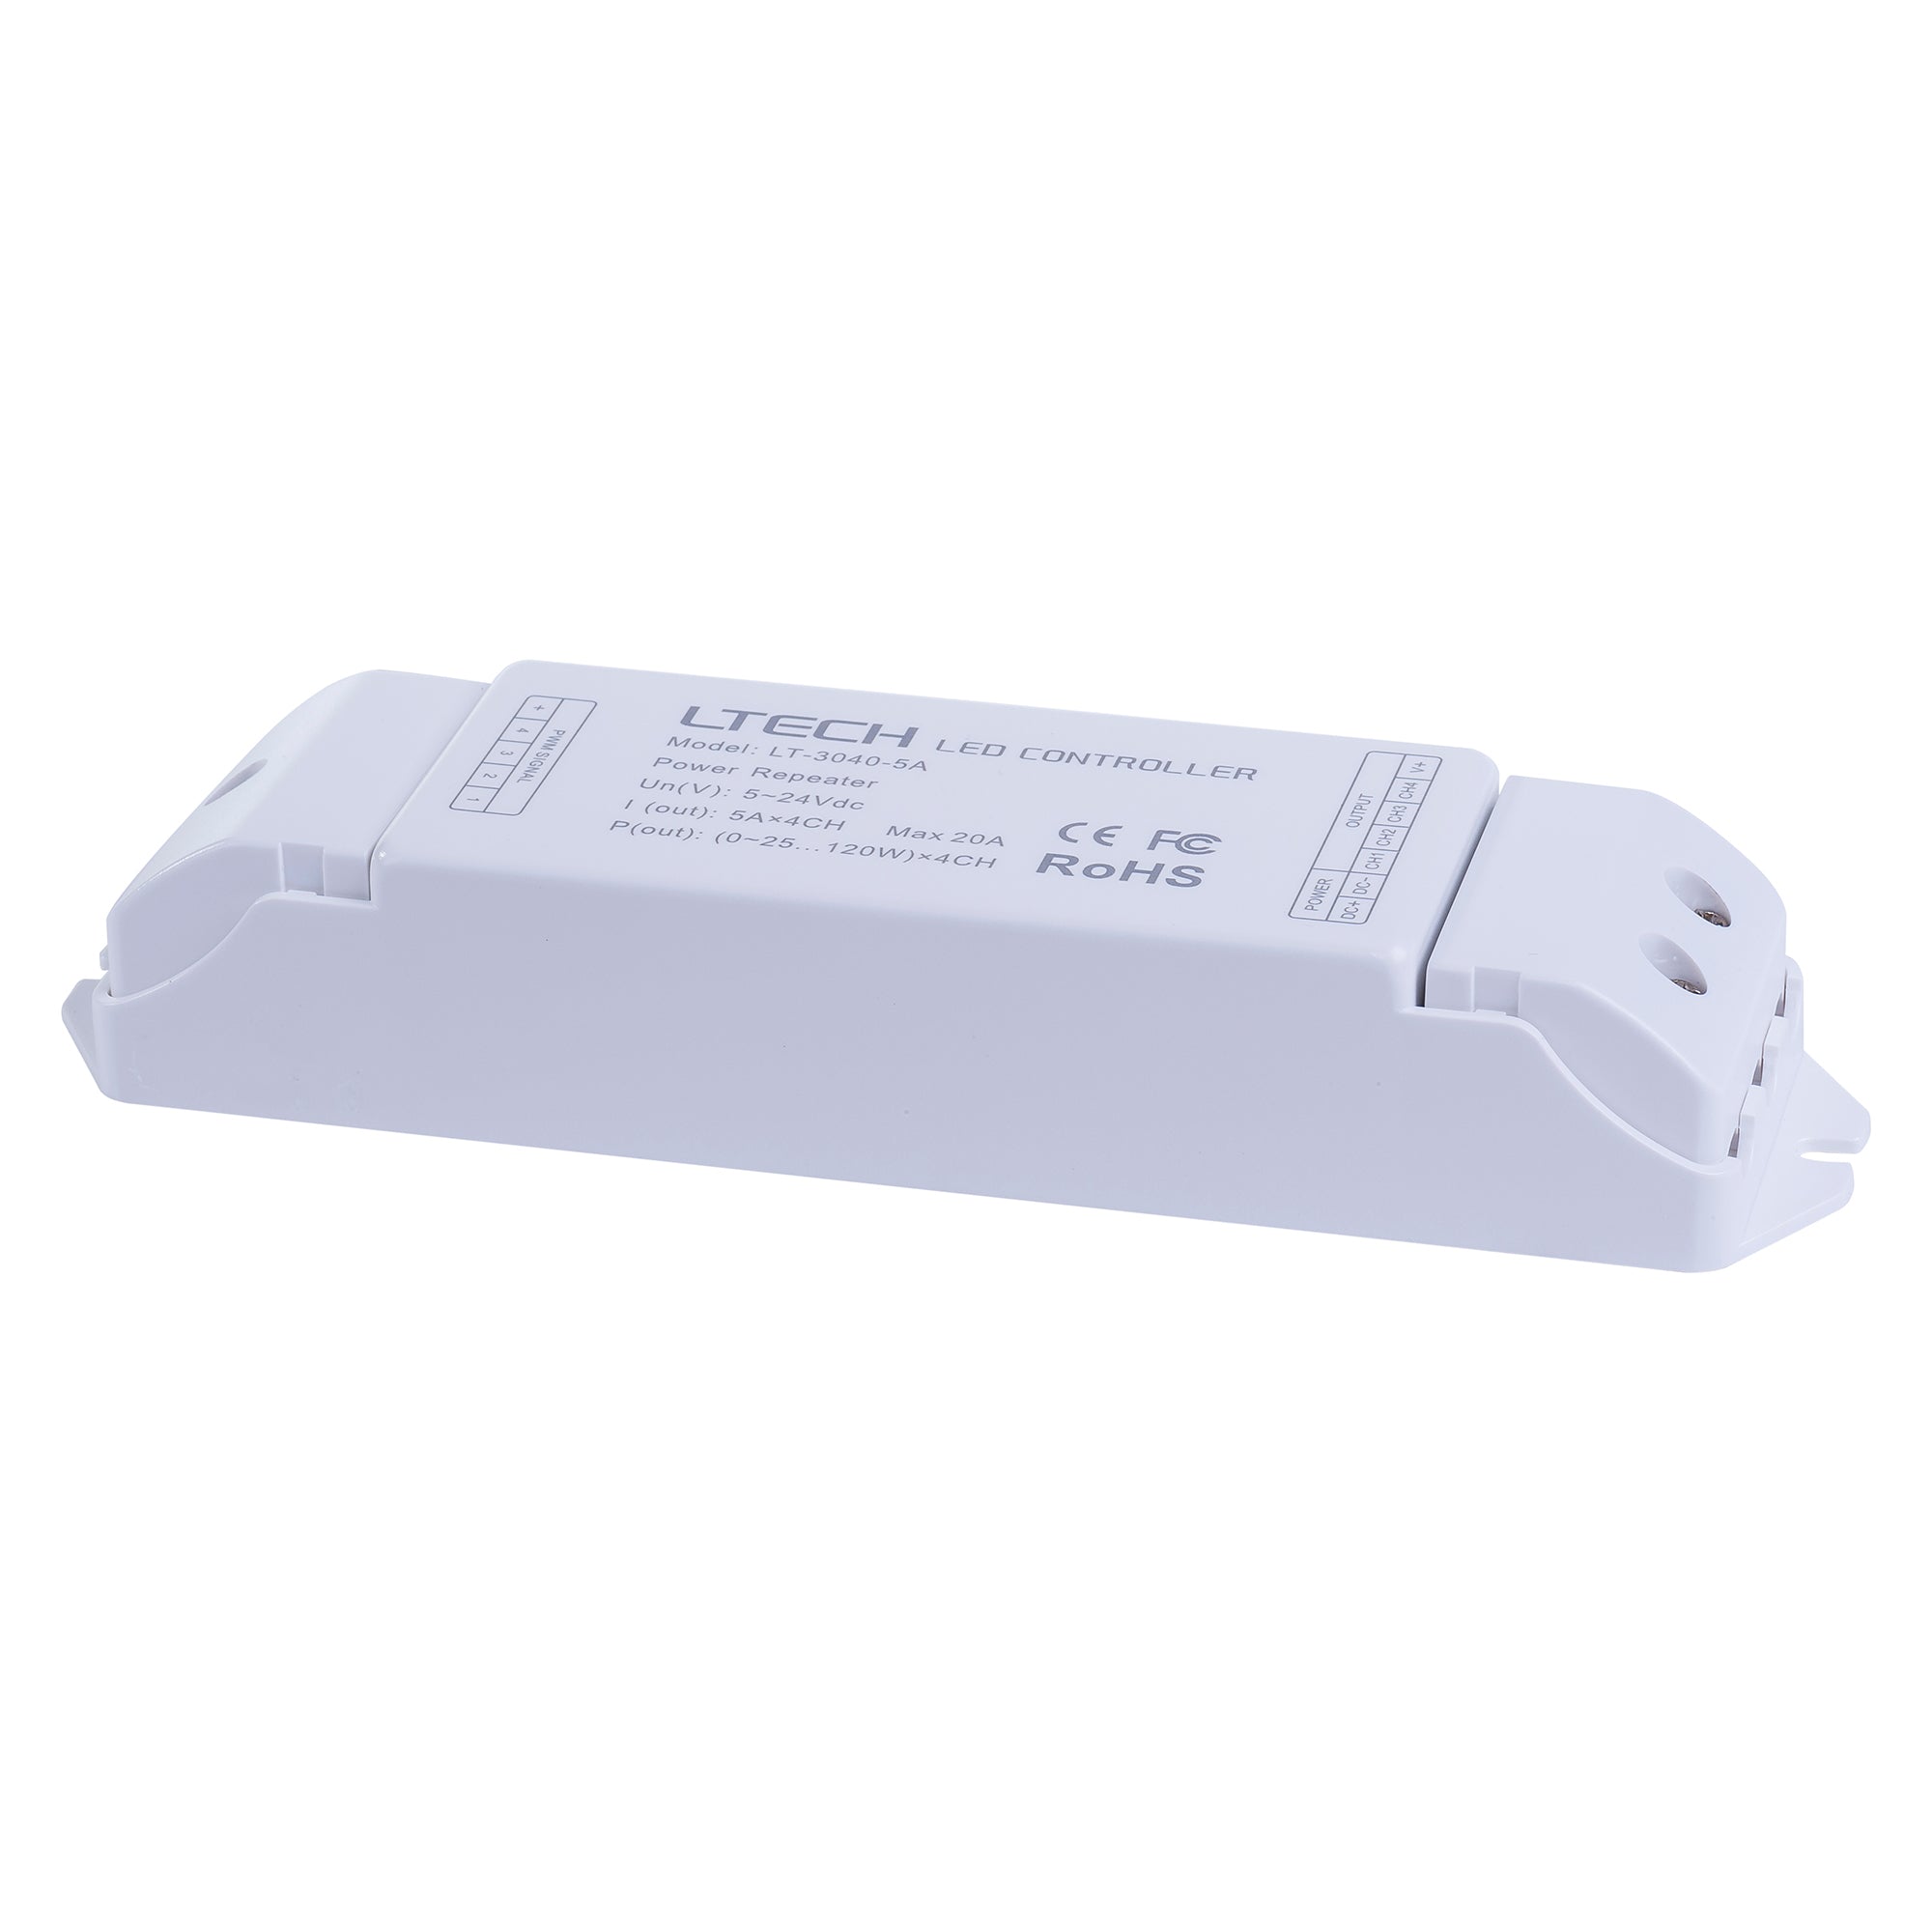 HV9104-LT-3040-5A - 4 Channel LED Strip Repeater